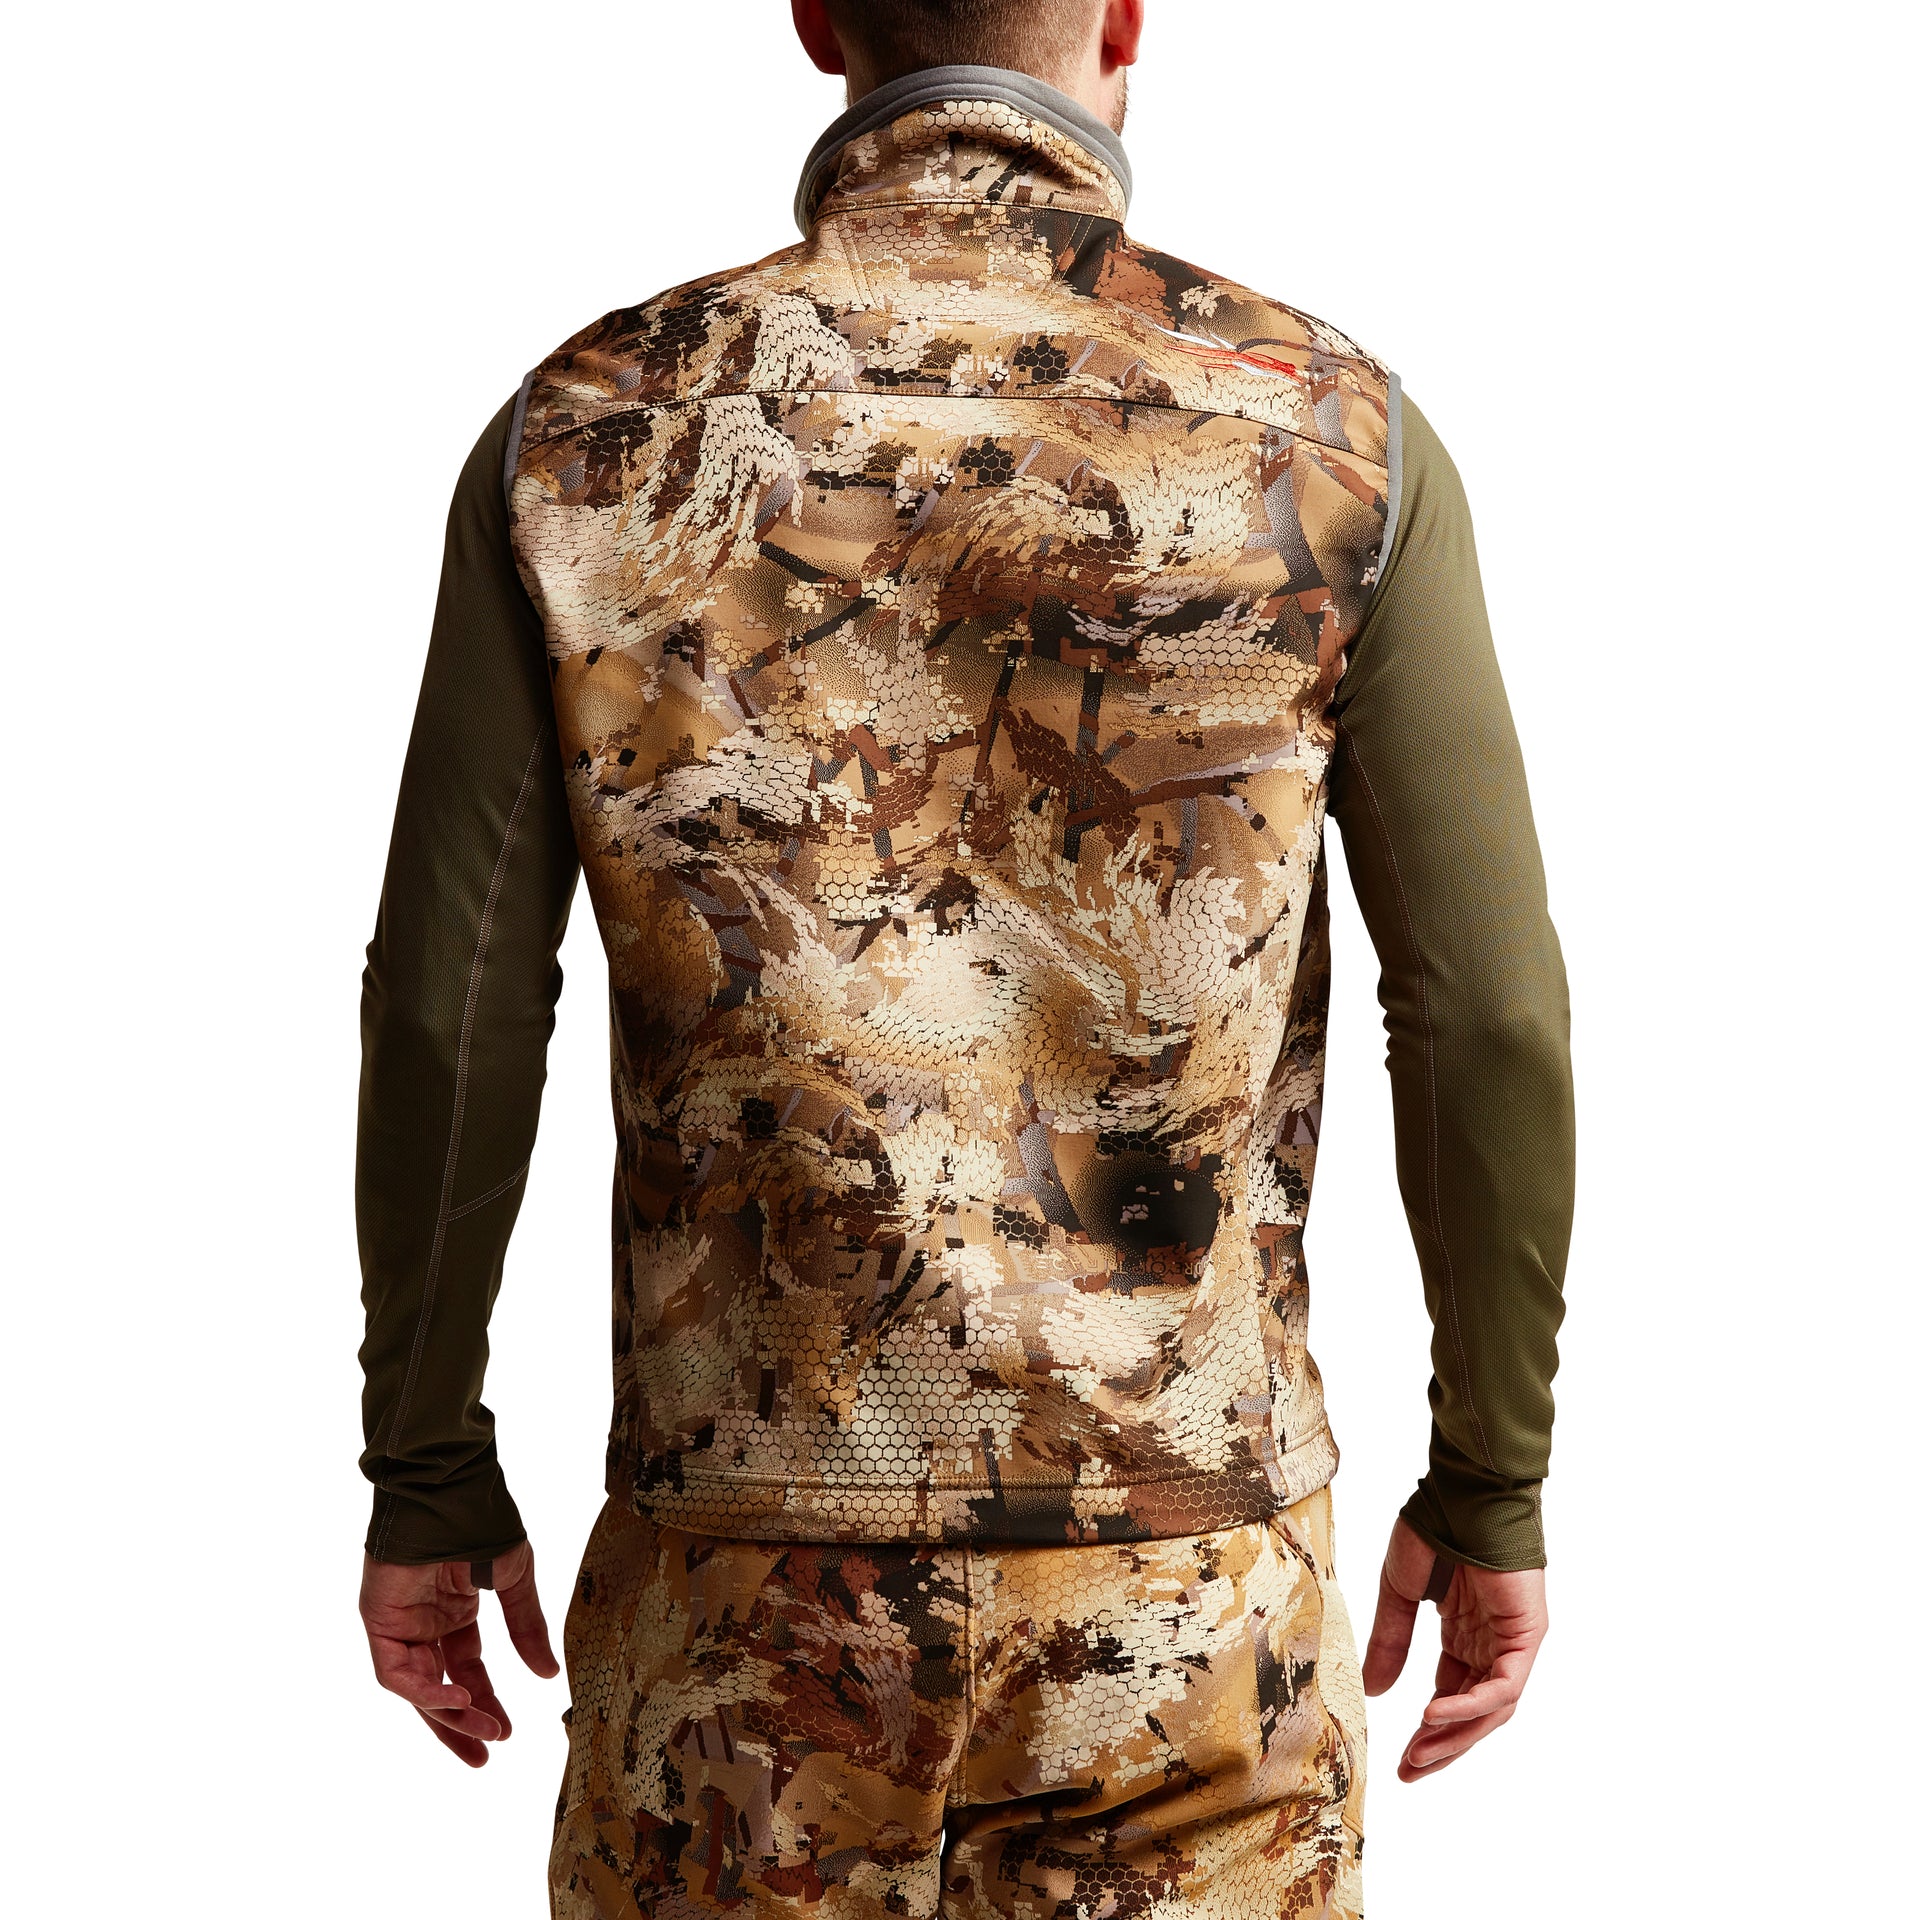 Wholesale Camouflage Fishing Vest for Outdoors Stream Fishing MDSFV-5